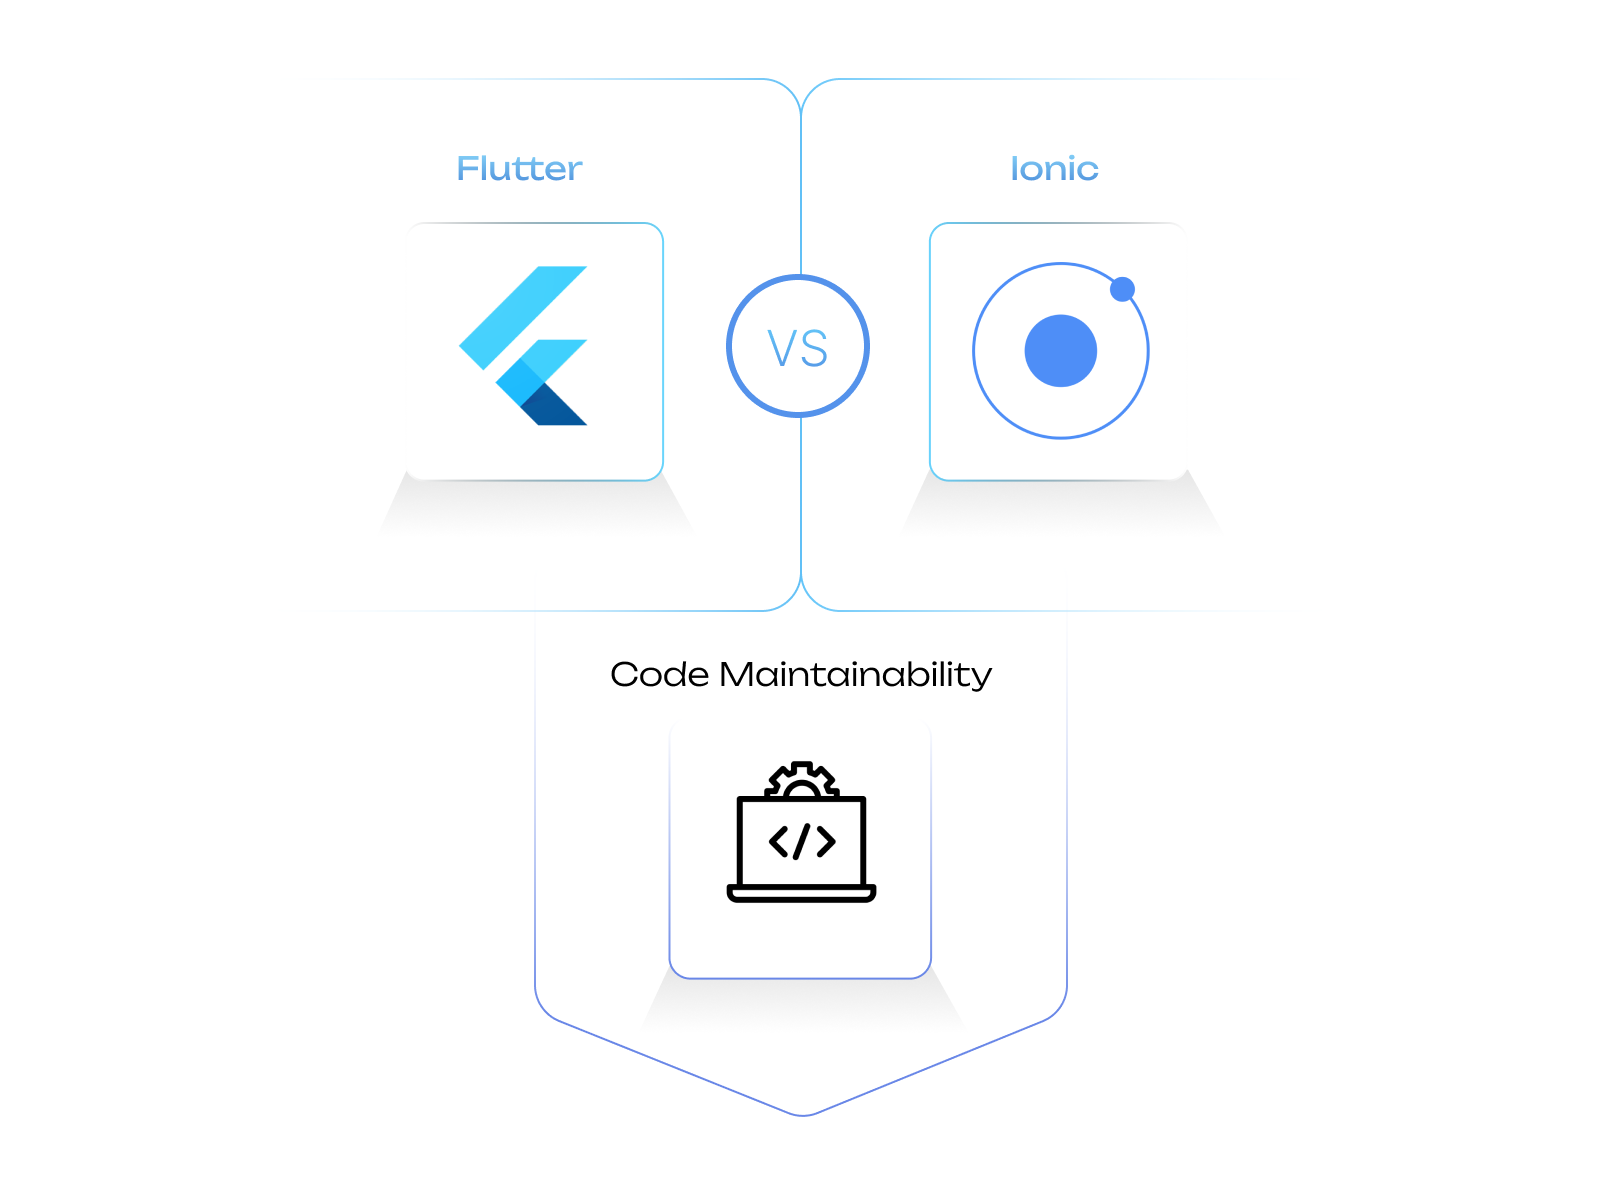 Ionic vs Flutter: Code Maintainability